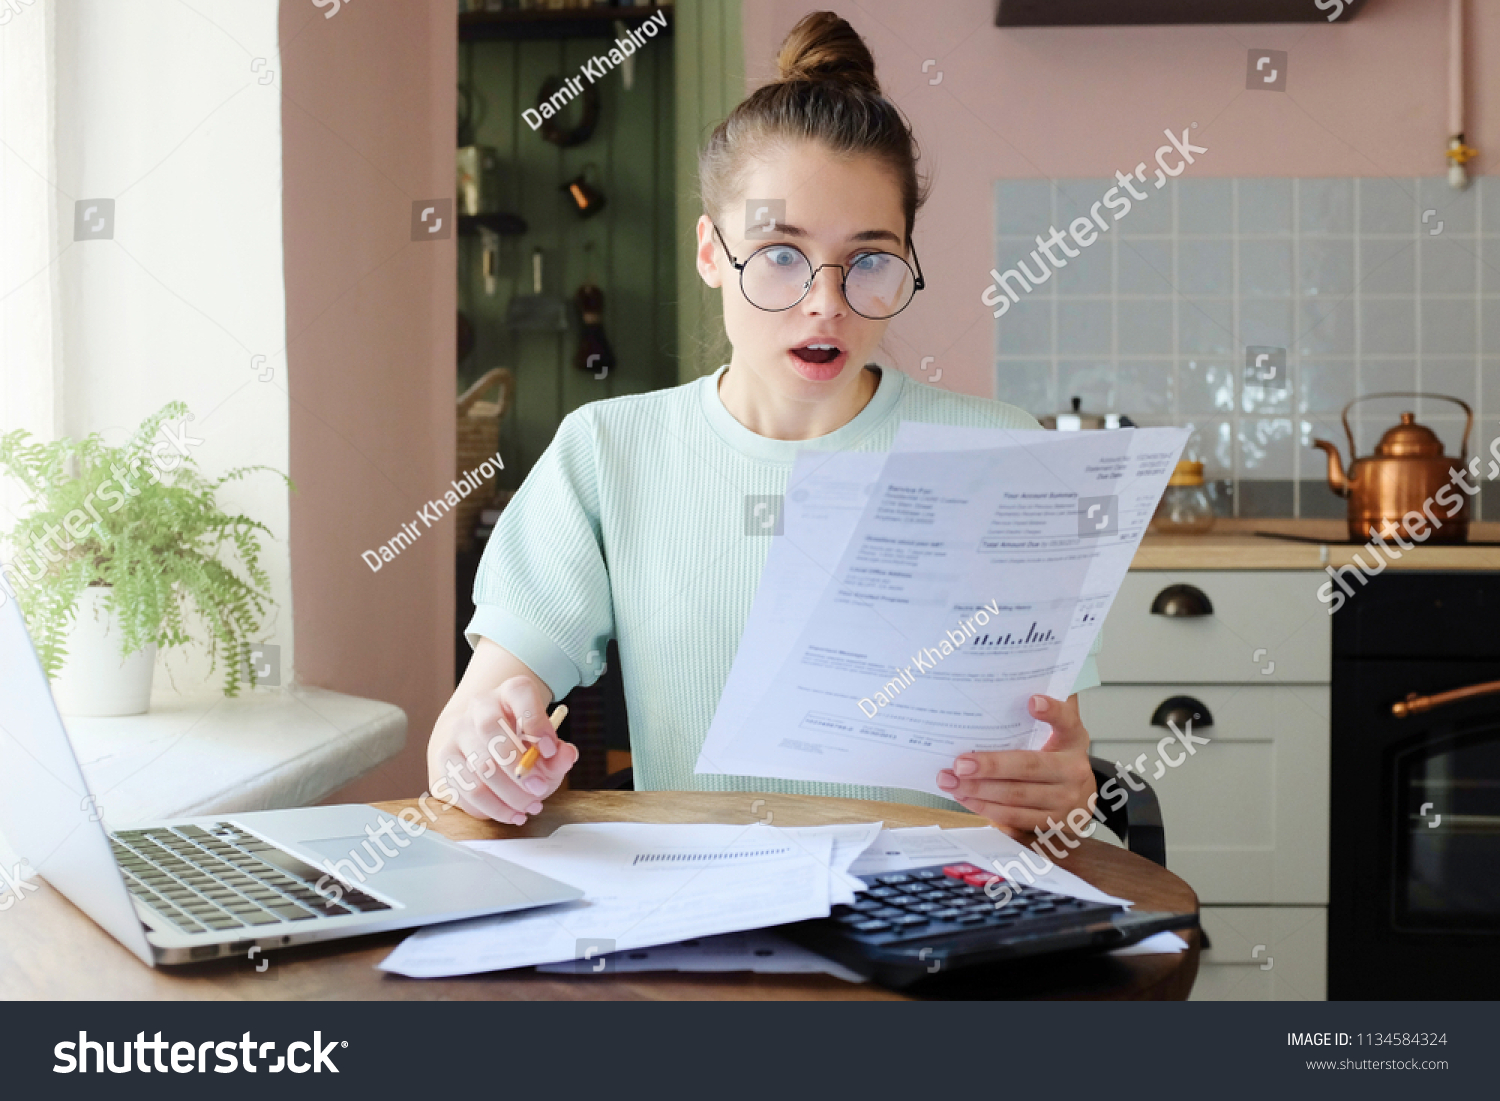 Horizontal closeup of European Caucasian lady spending afternoon at kitchen table, wearing eyeglasses, looking shocked with what she sees in documents she is dealing with, dissatisfied with debts #1134584324